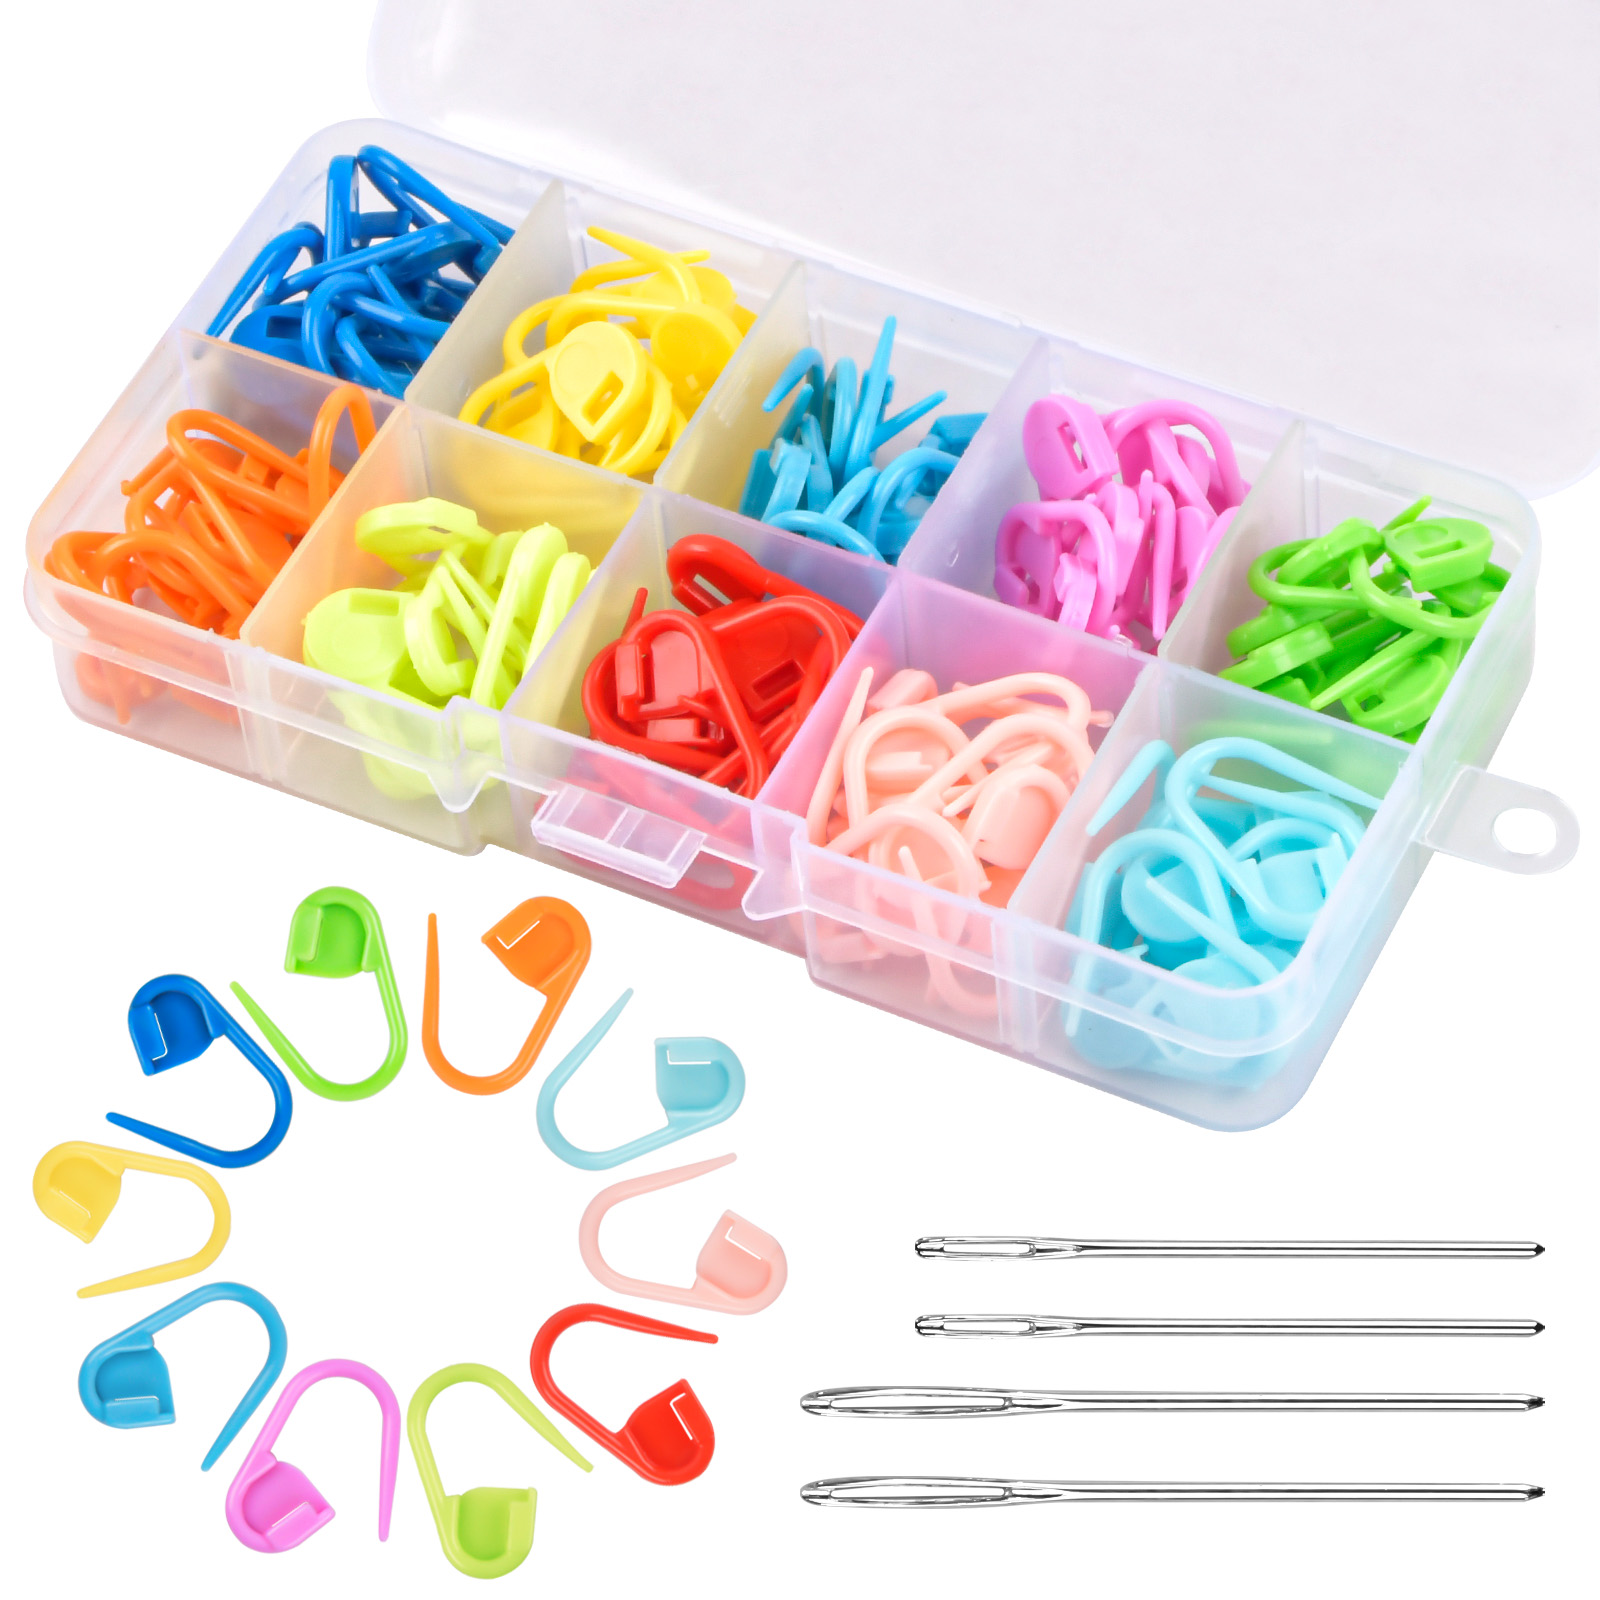  NUTJAM 120 Pcs Colorful Knitting Markers, Plastic Crochet Pins  Clips, Bulk Stitch Markers, Locking Stitch Safety Pins, Knitting Place  Markers for DIY, Craft,Weaving, Sewing（Mix Color,120 Pieces）